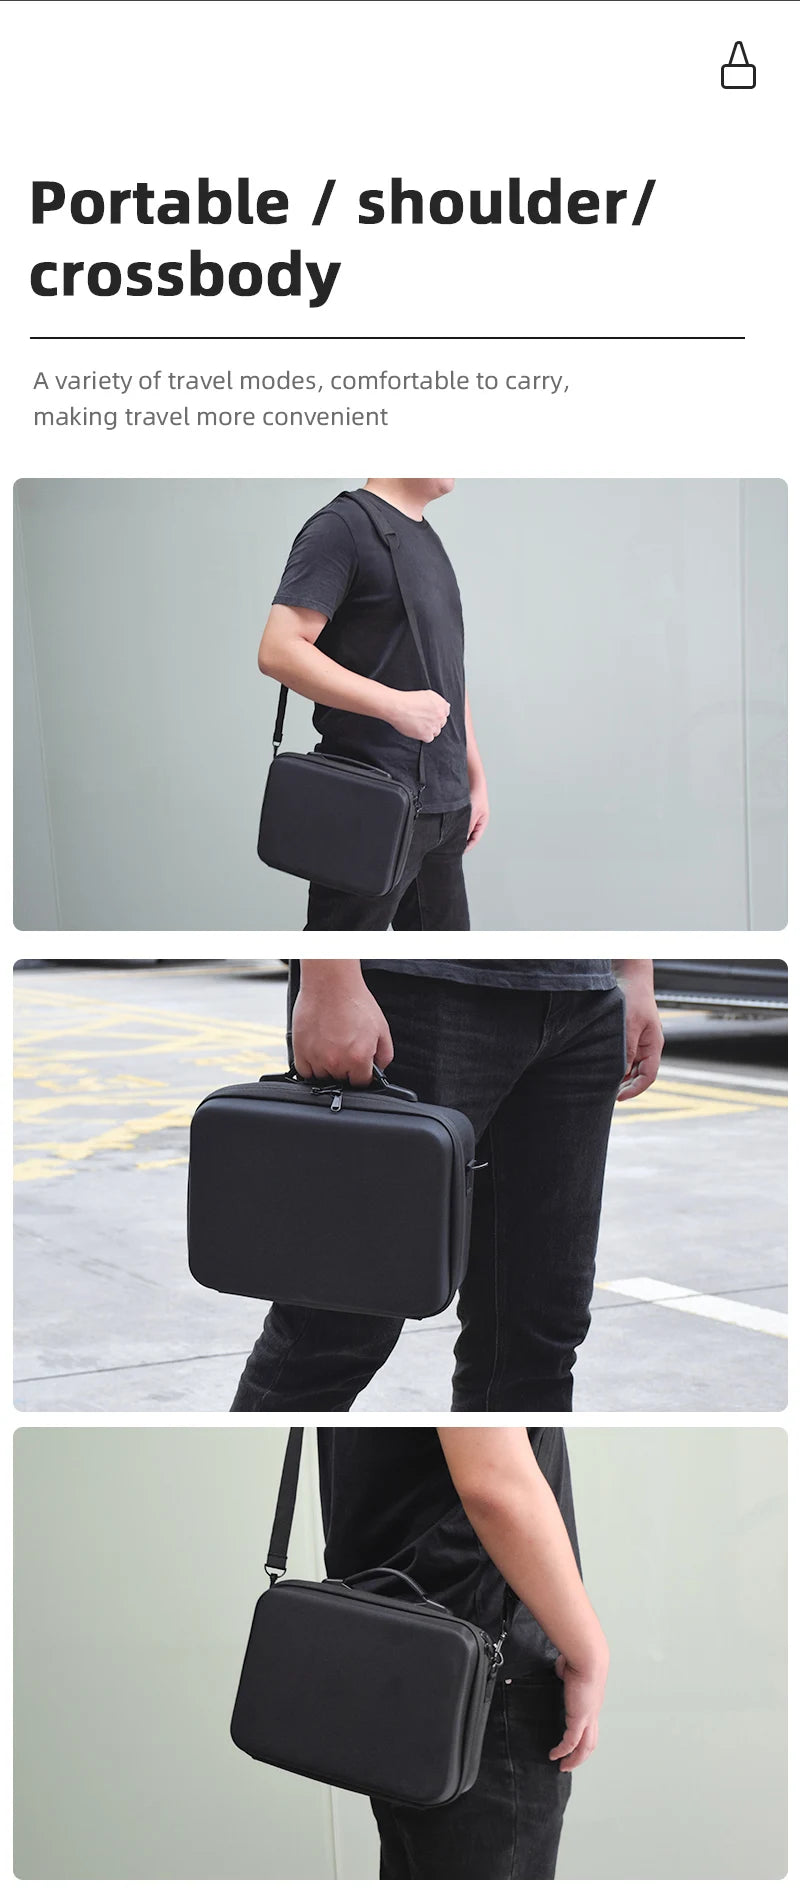 Storage Bag for DJI MINI 3 PRO, portable / shoulder/ crossbody A variety of travel modes, making travel more convenient .